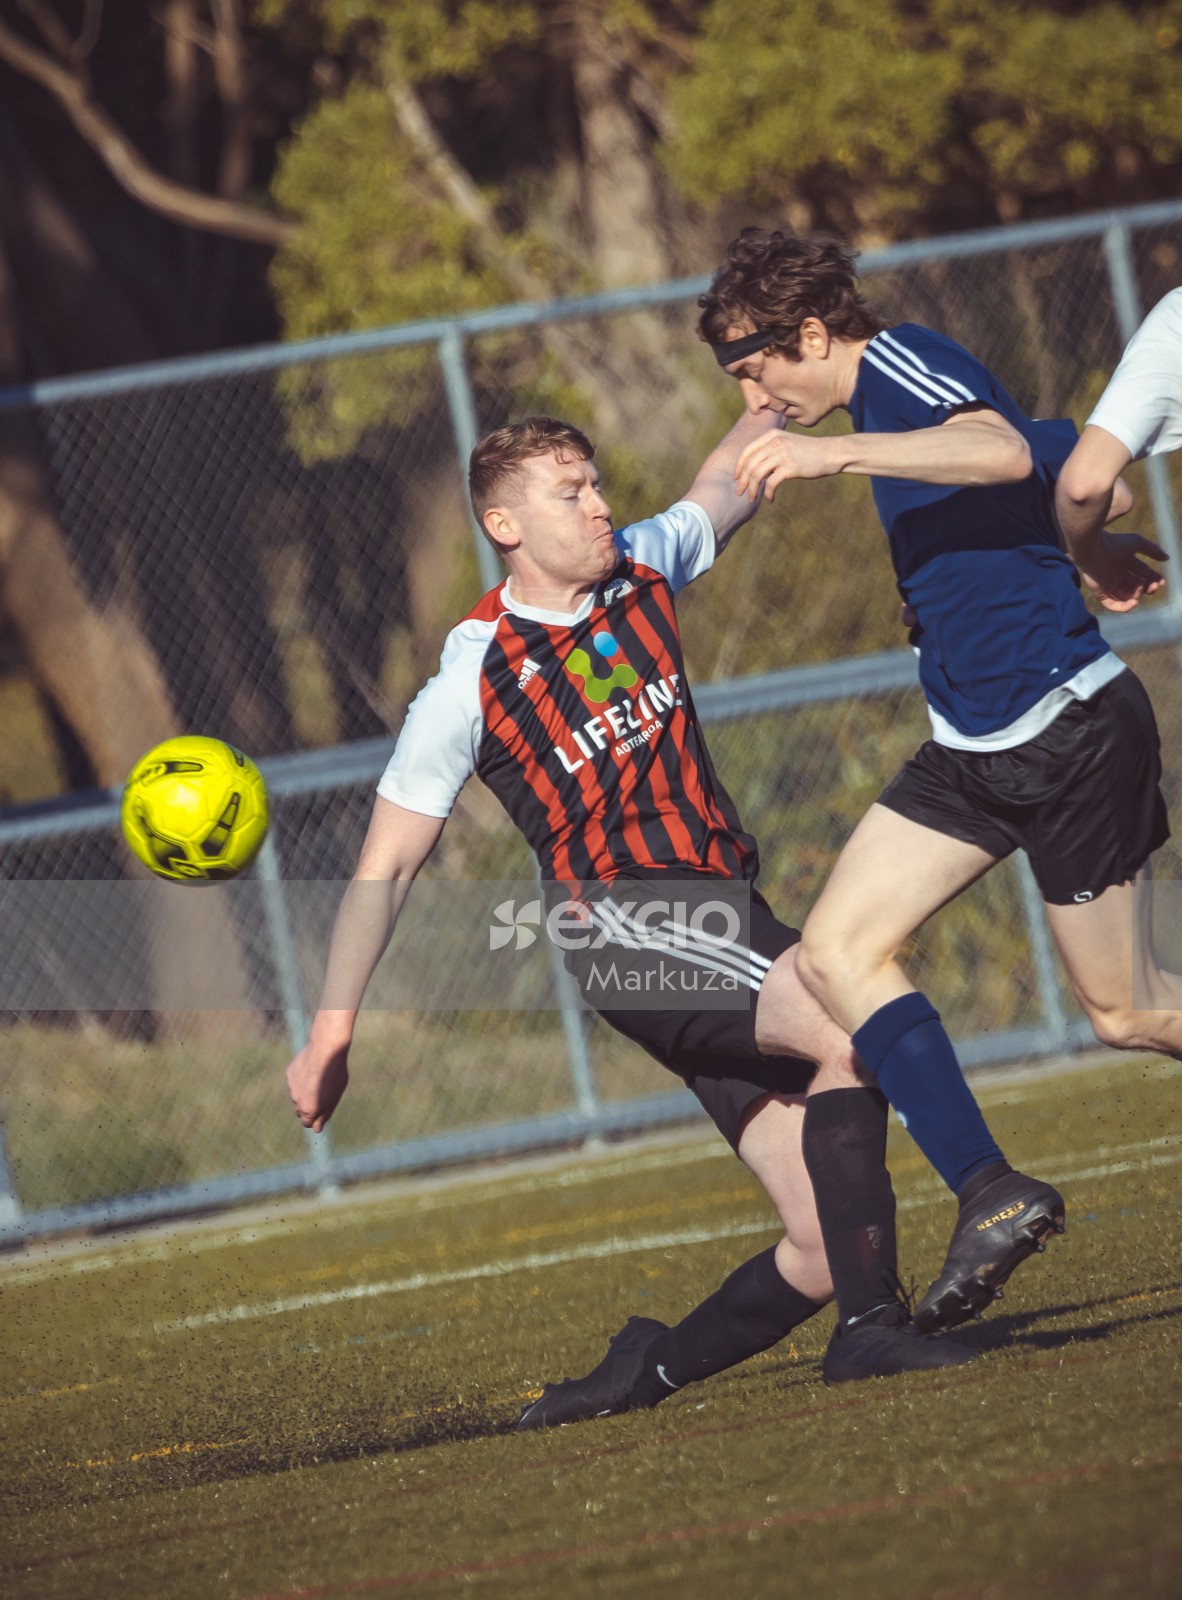 Super Paddys FC player tackling opponent from the front - Sports Zone sunday league